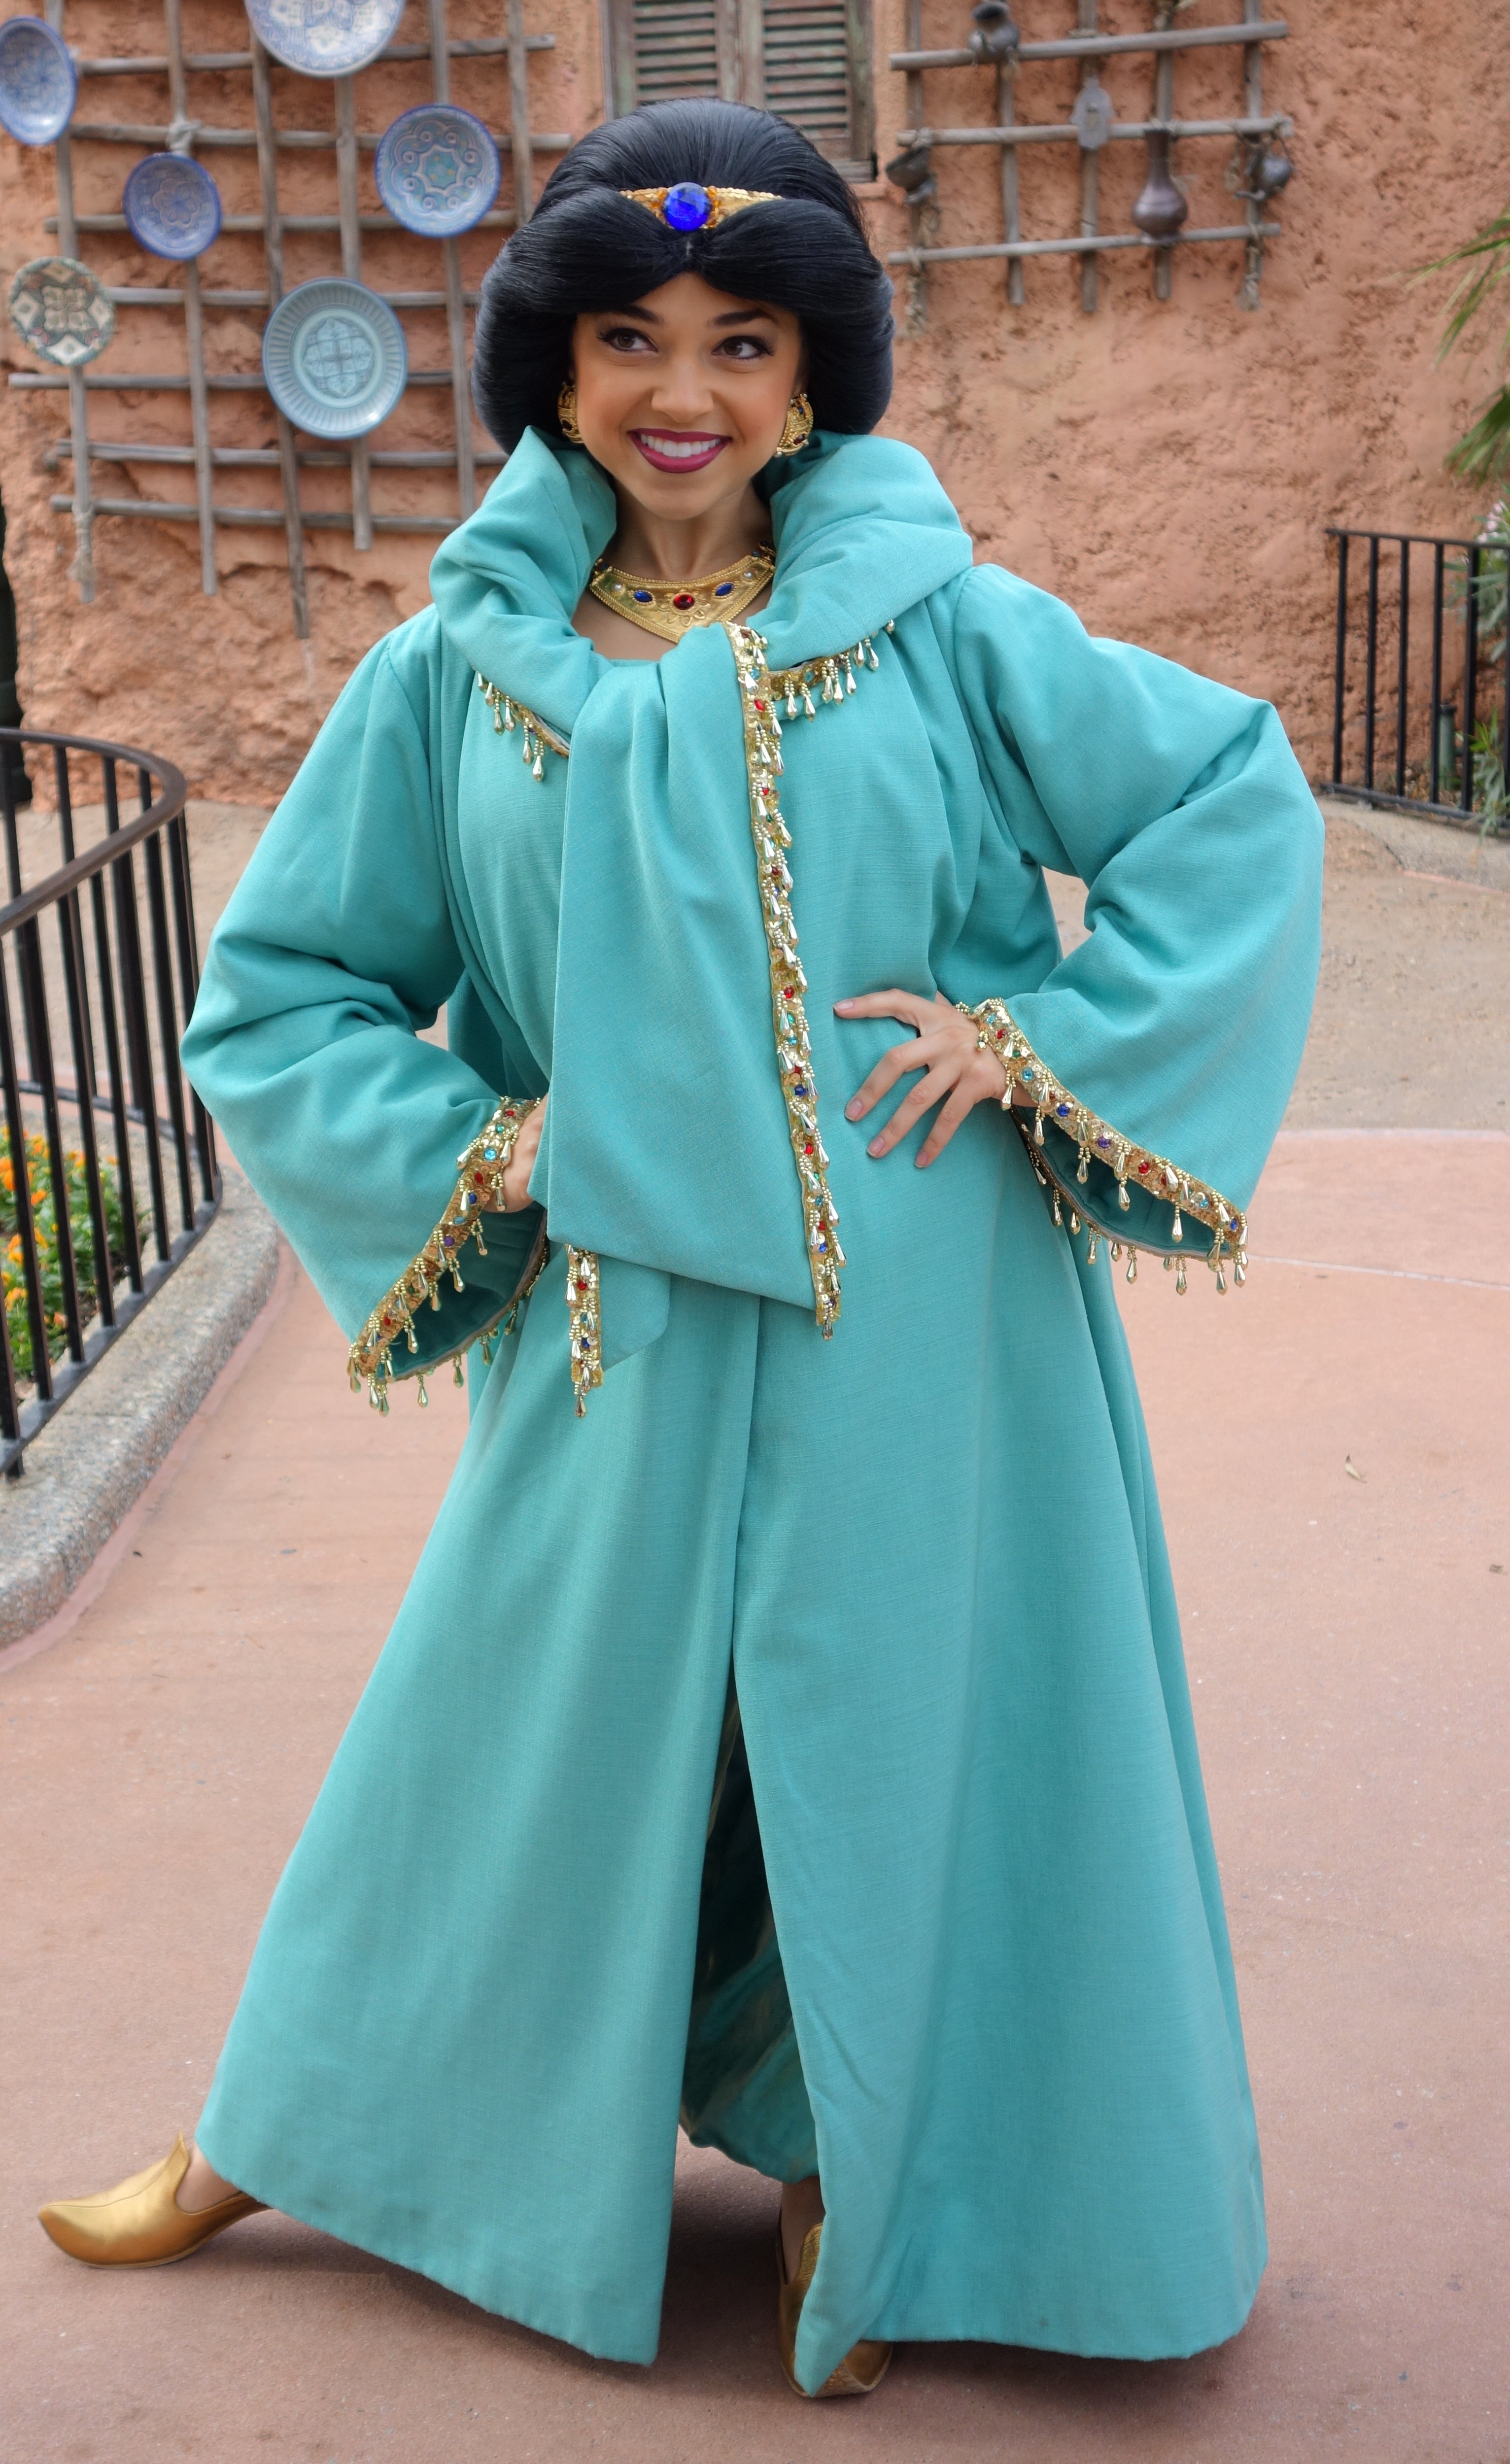 Jasmine at Morocco in EPCOT 2013